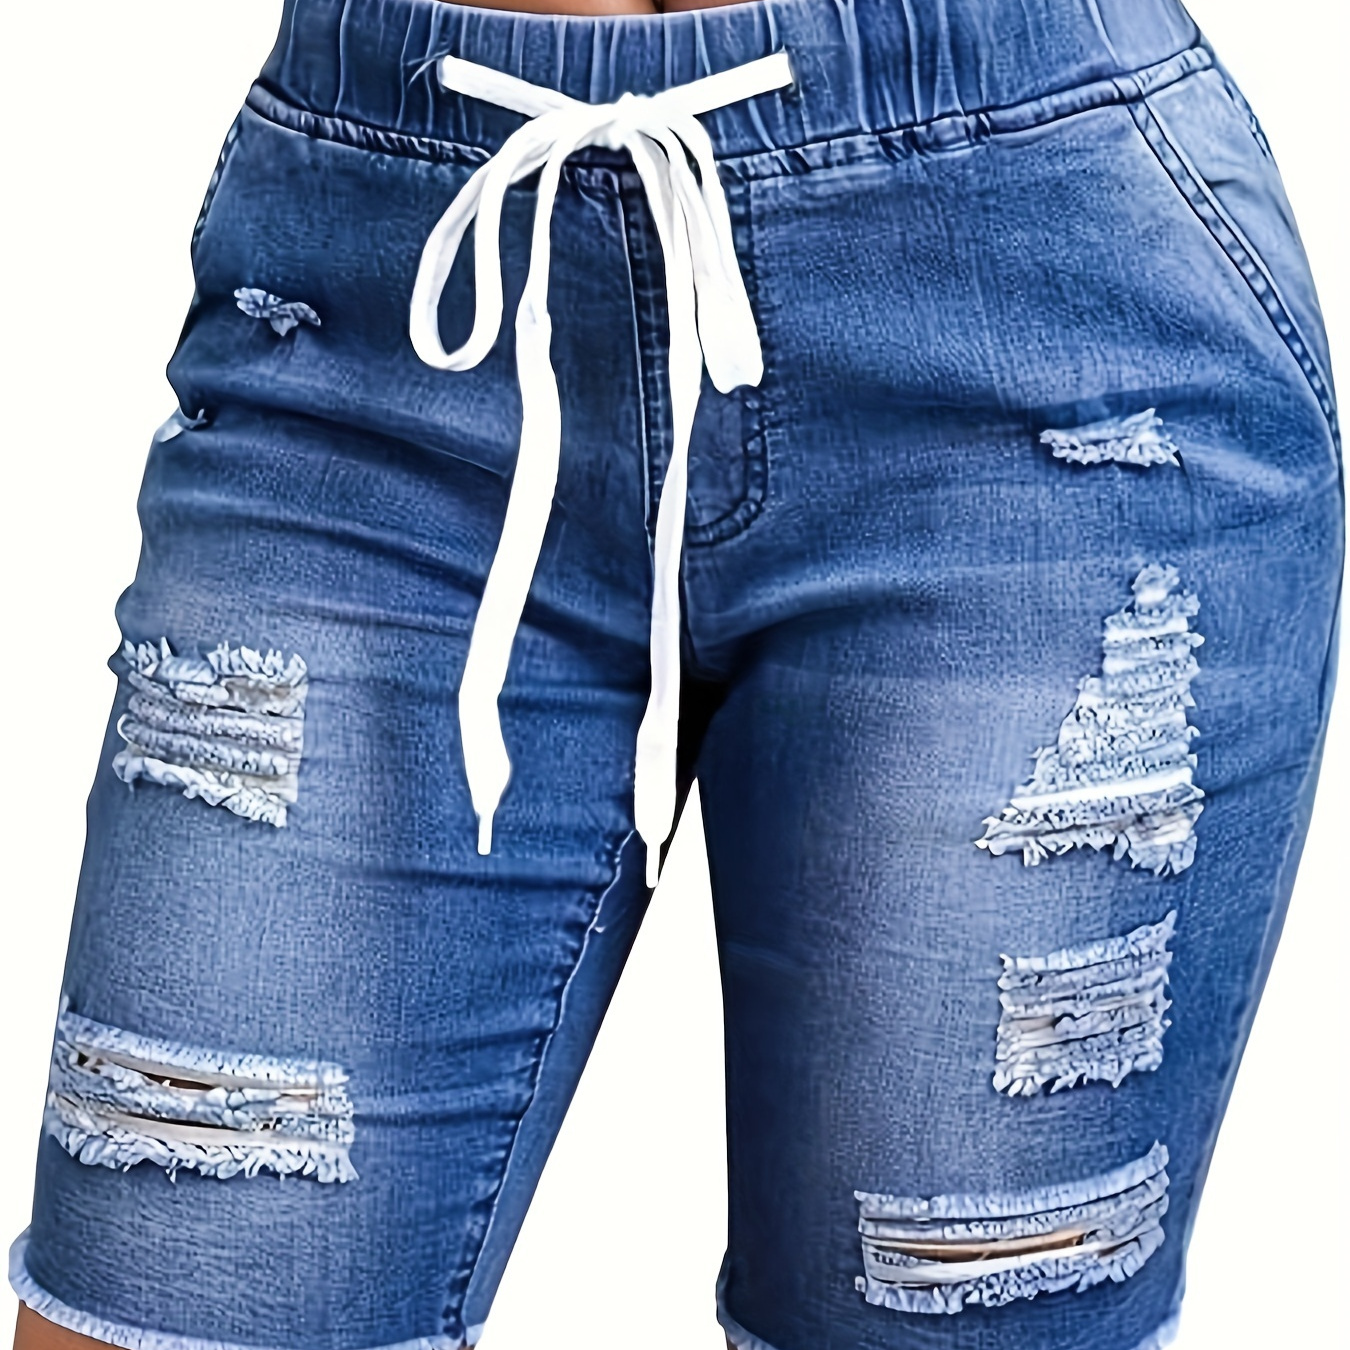 

Women's Fashion Ripped Elastic Waist Denim Bermuda Shorts, Casual Style, Stretchable Mid-length Jeans With Drawstring